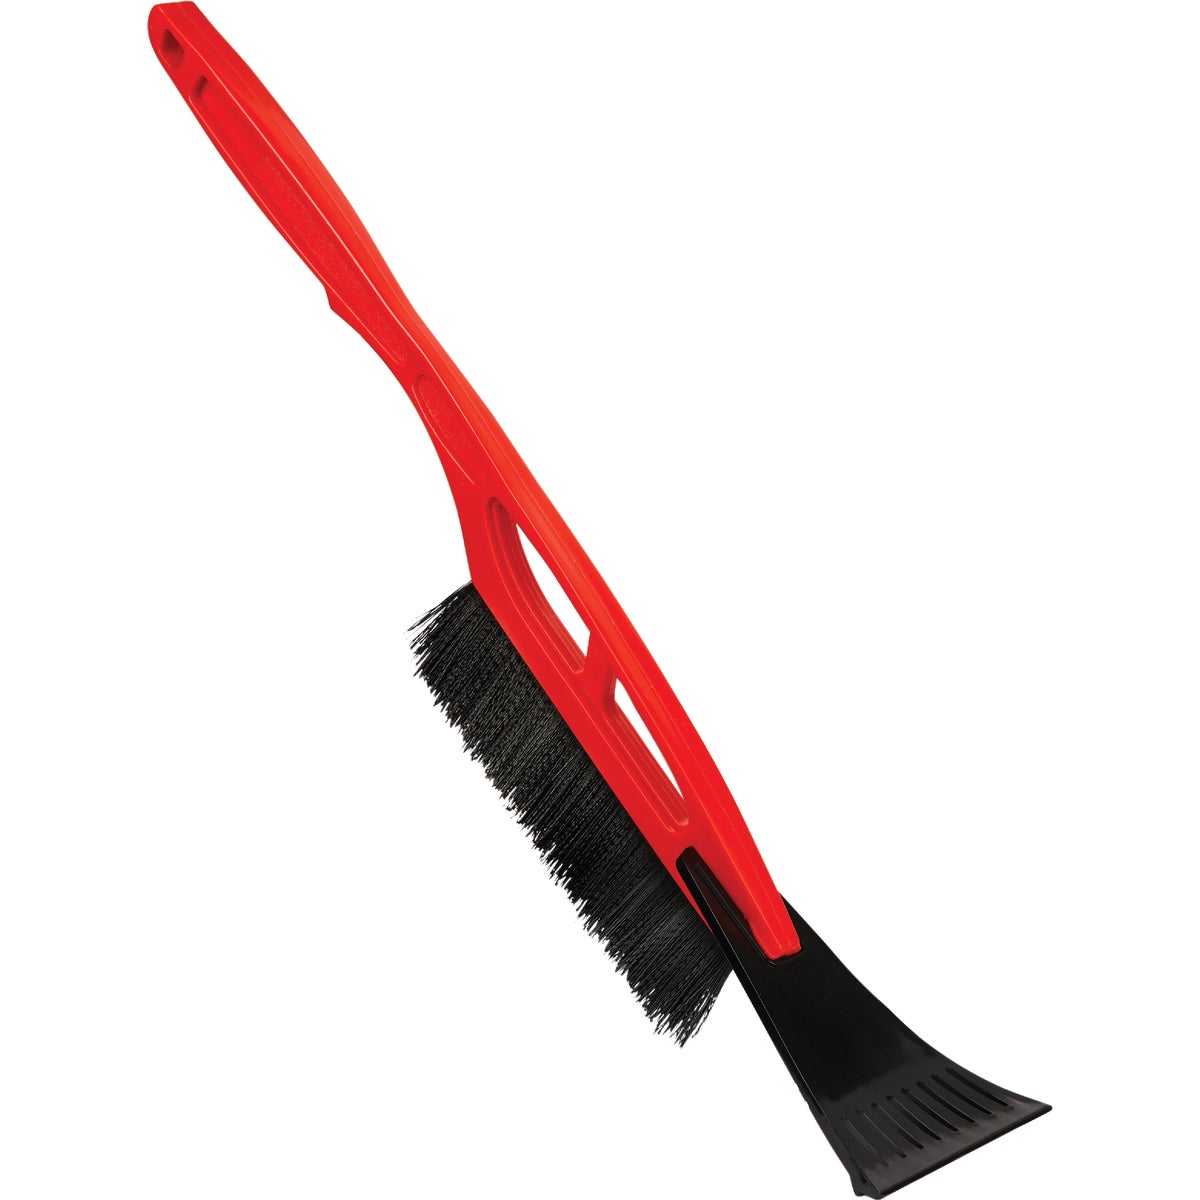 Item 570588, A versatile tool for snow and ice removal.